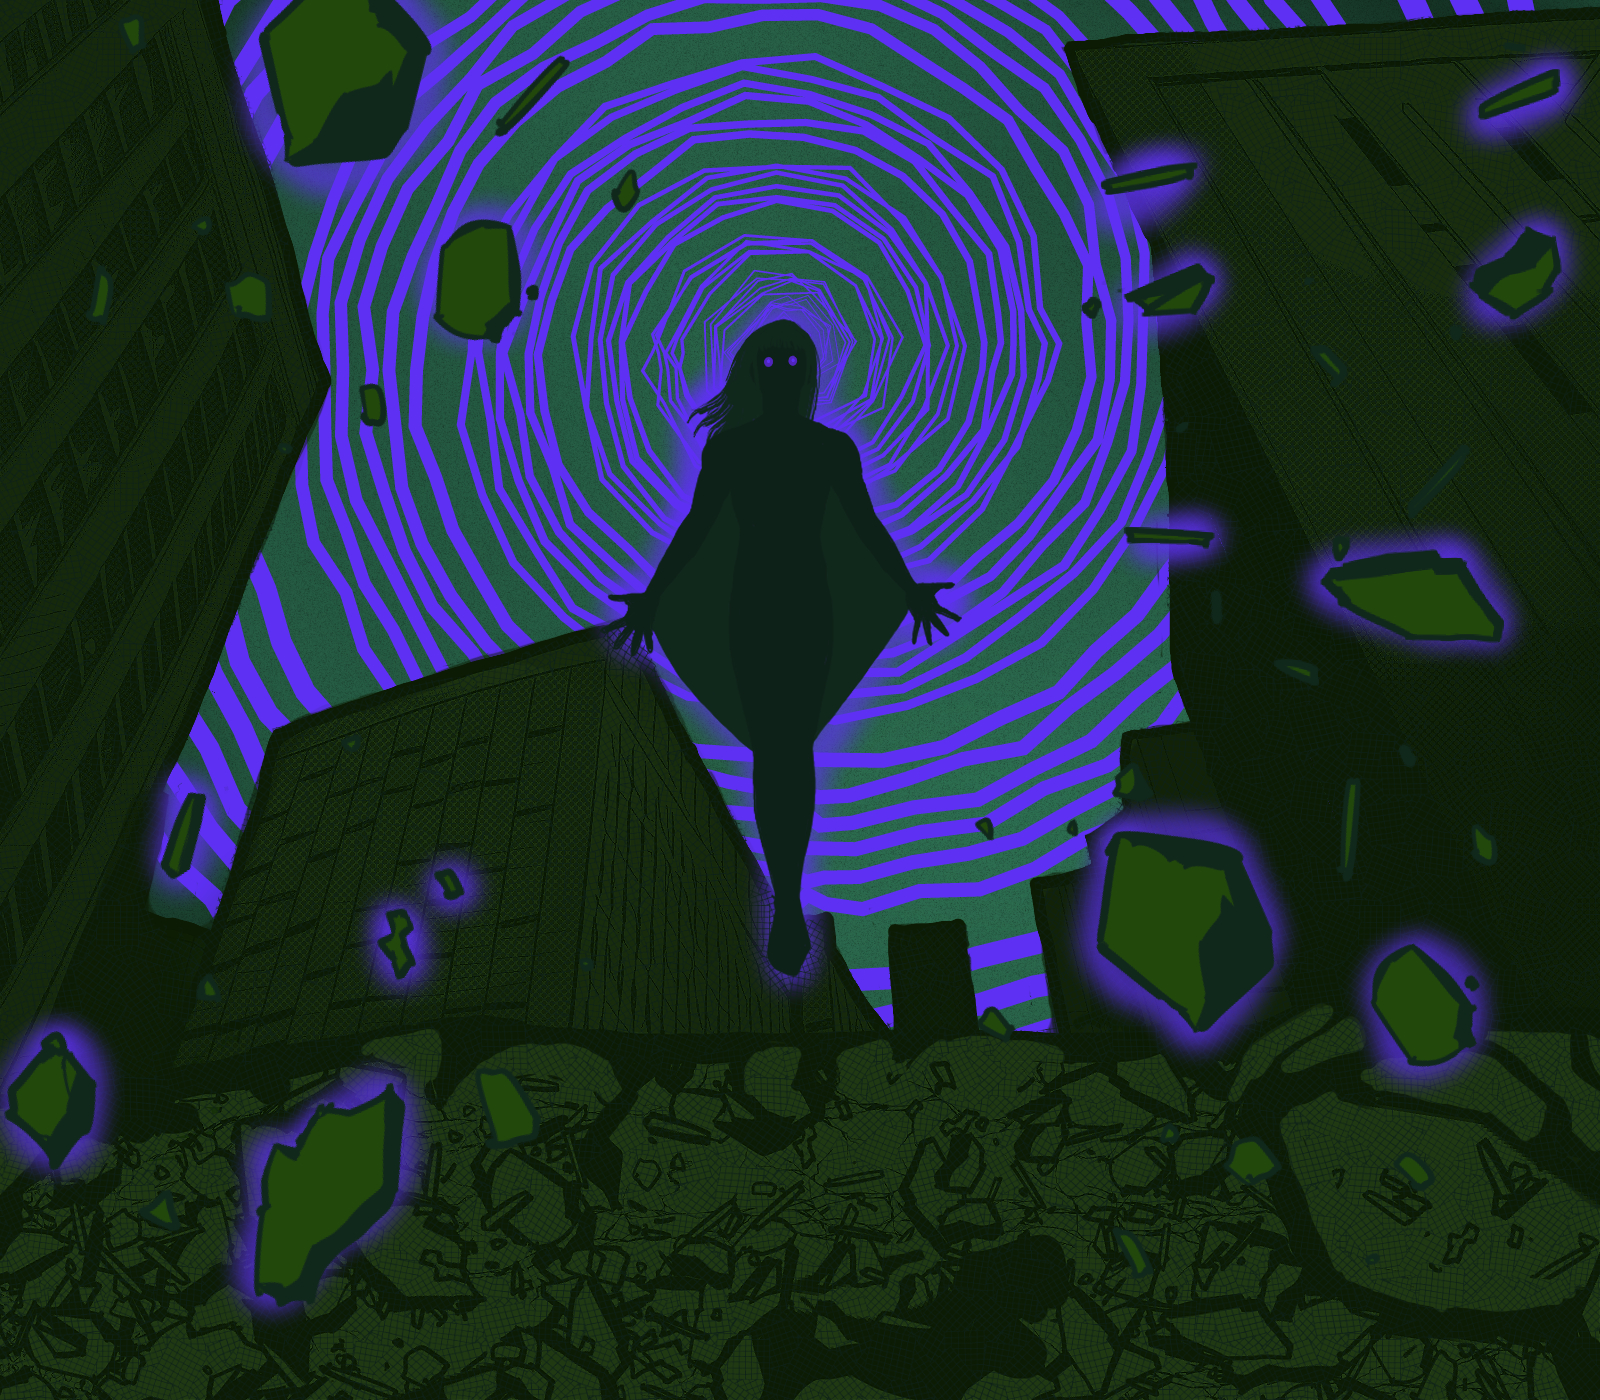 A green and purple illustration of an ominous floating figure